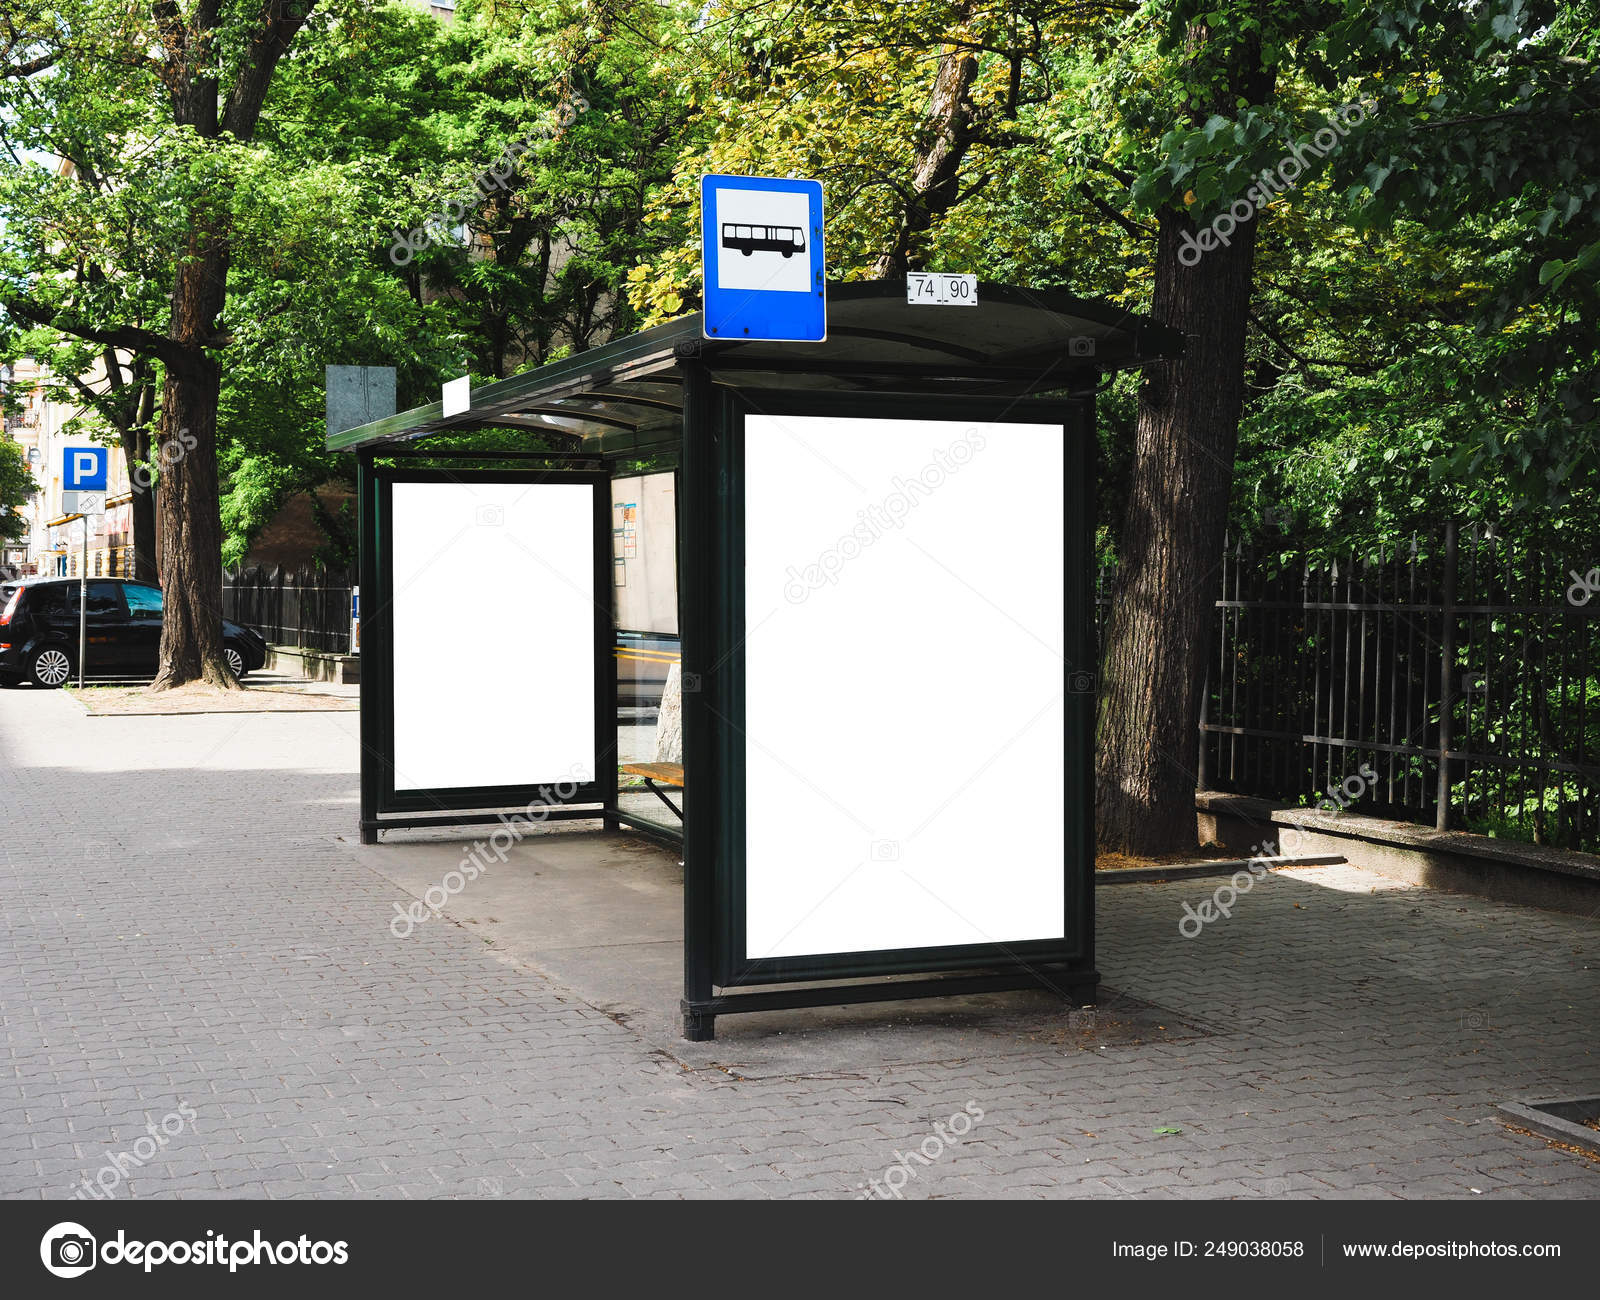 Download Bus Tram Stop Shelter White Empty Place For Street Ads Advertisement Board Mock Up Mockup Signage Bus Stop Stock Photo Image By C Digitalmammoth 249038058